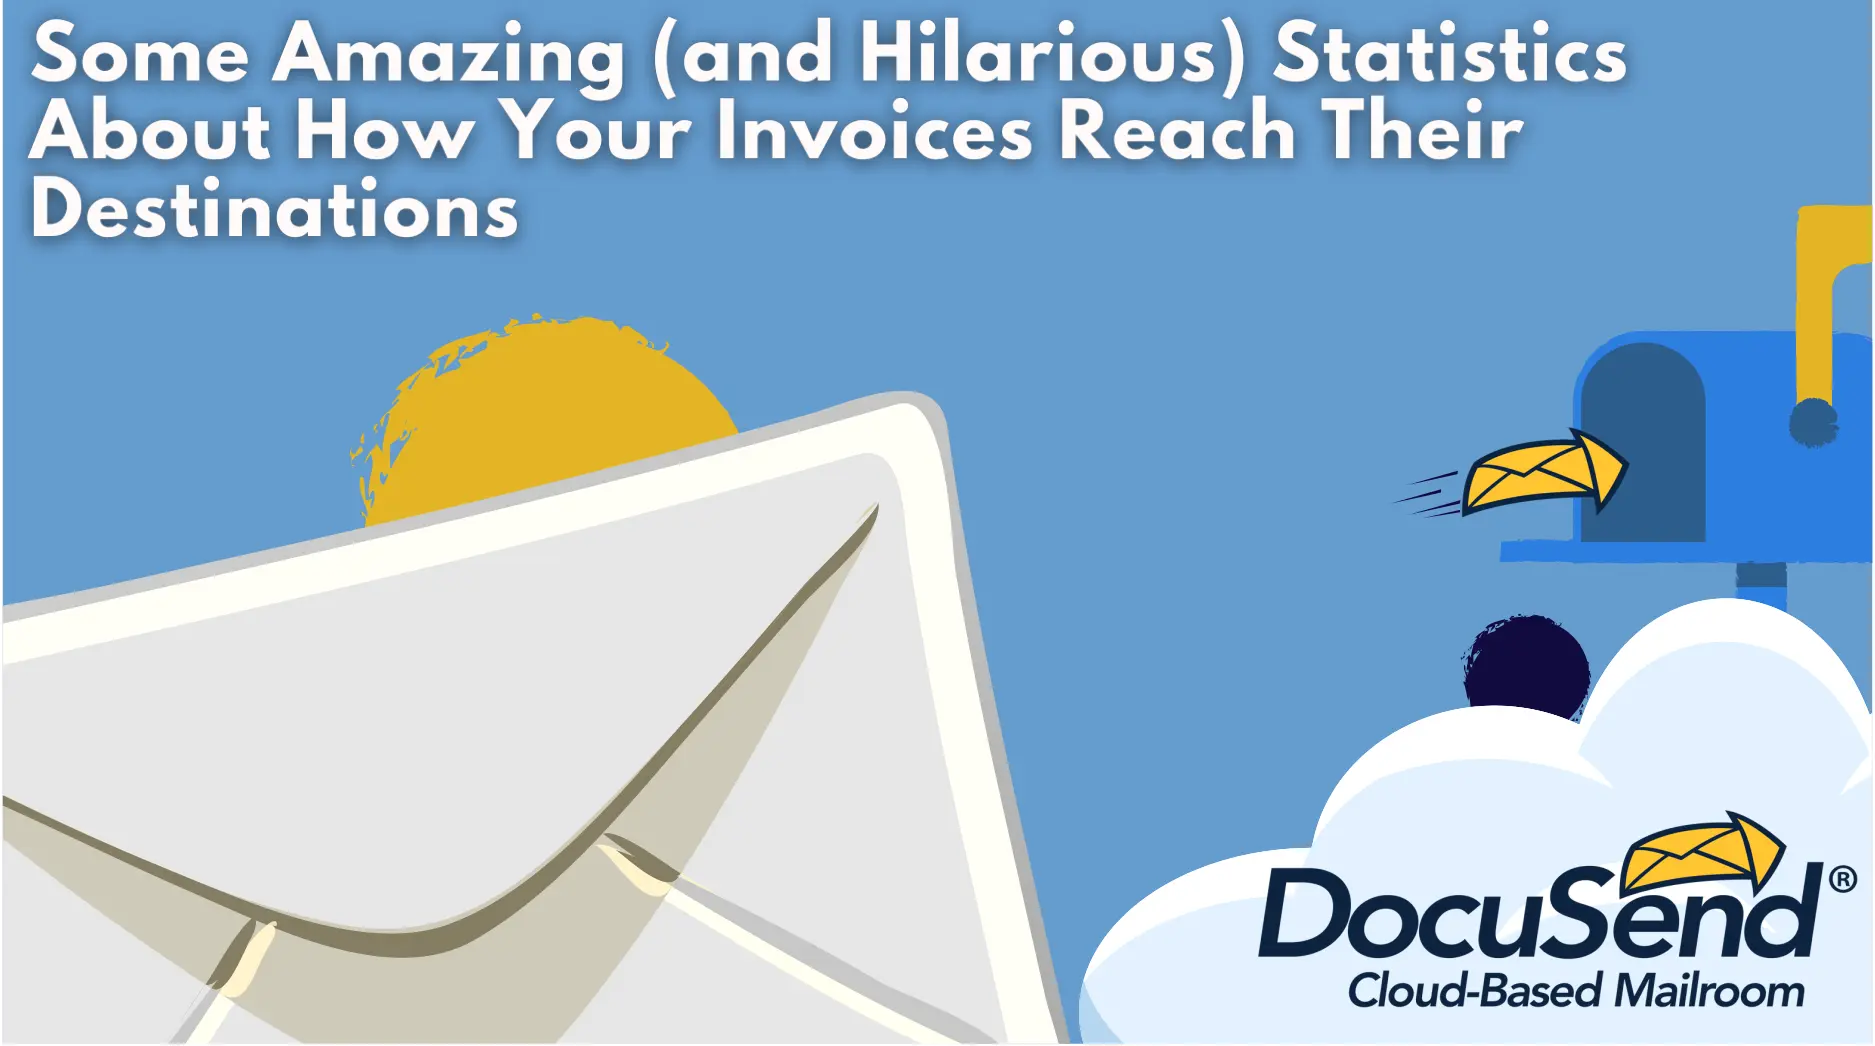 How Your Invoices Reach Their Destinations